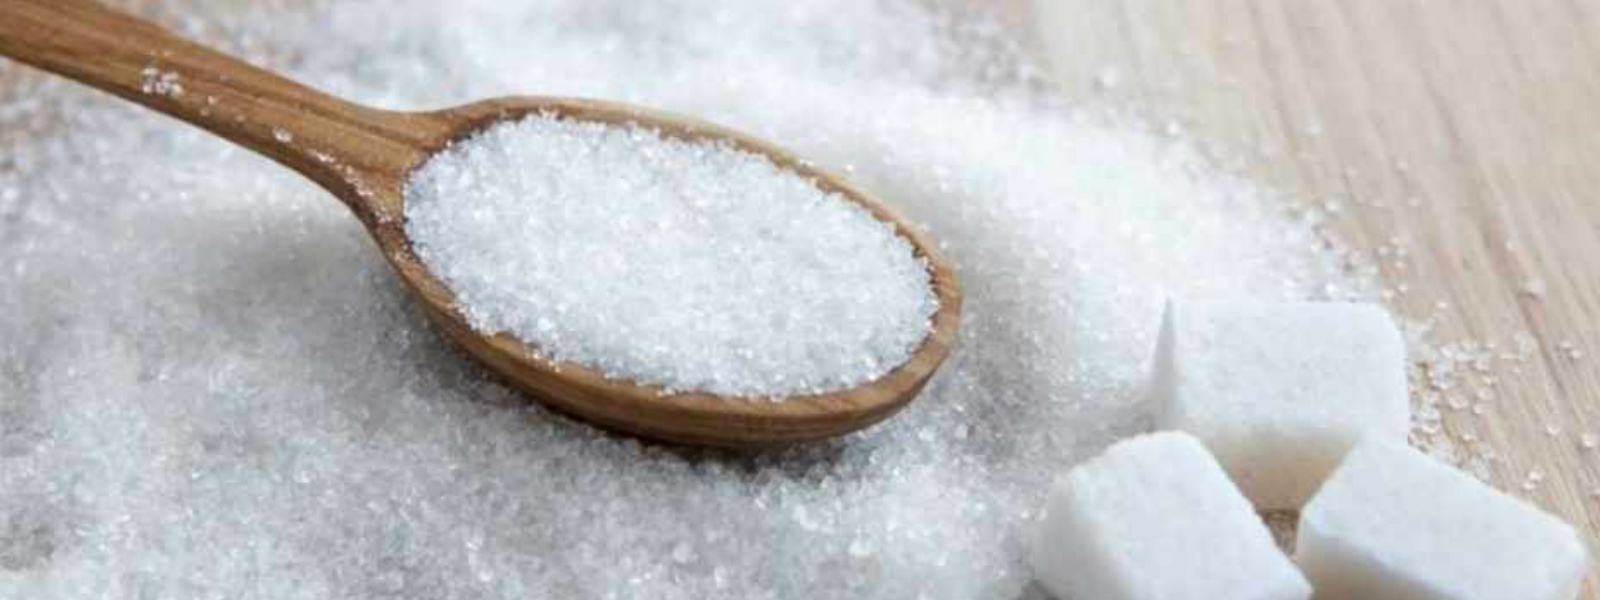 The "sugar scam" explained